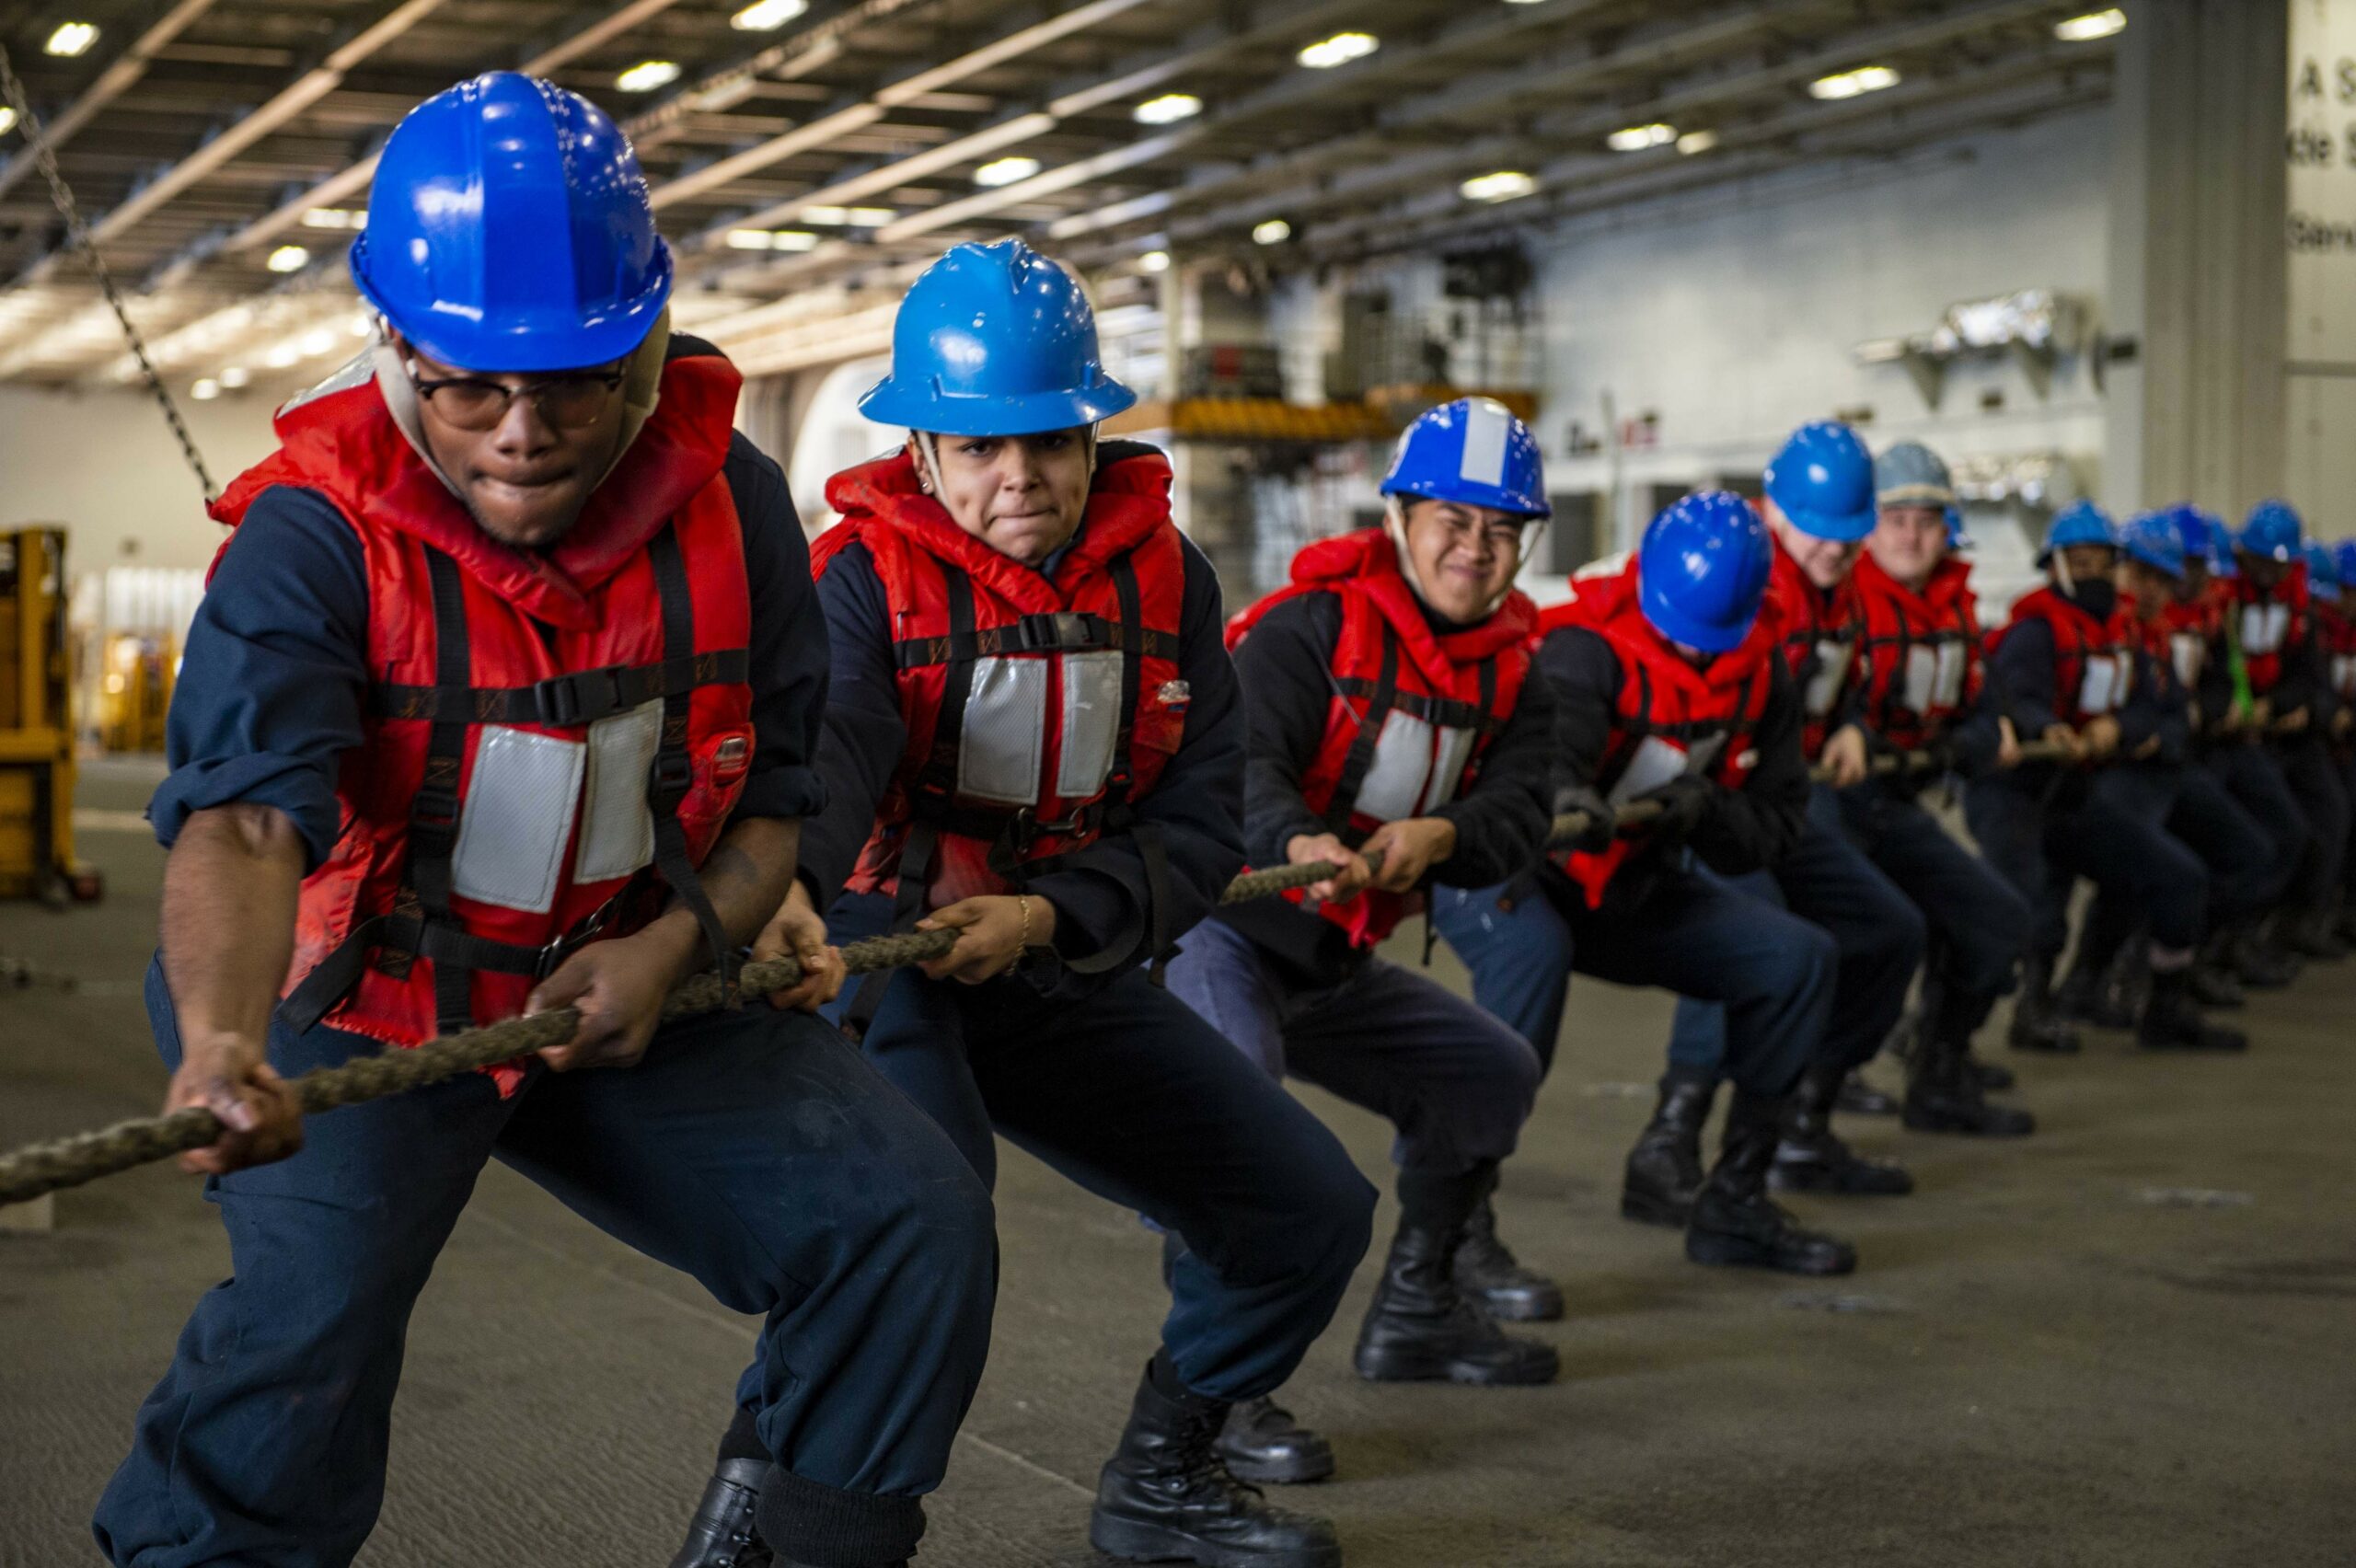 Mission: Crew Health and Warfighter Resilience > United States Navy > News